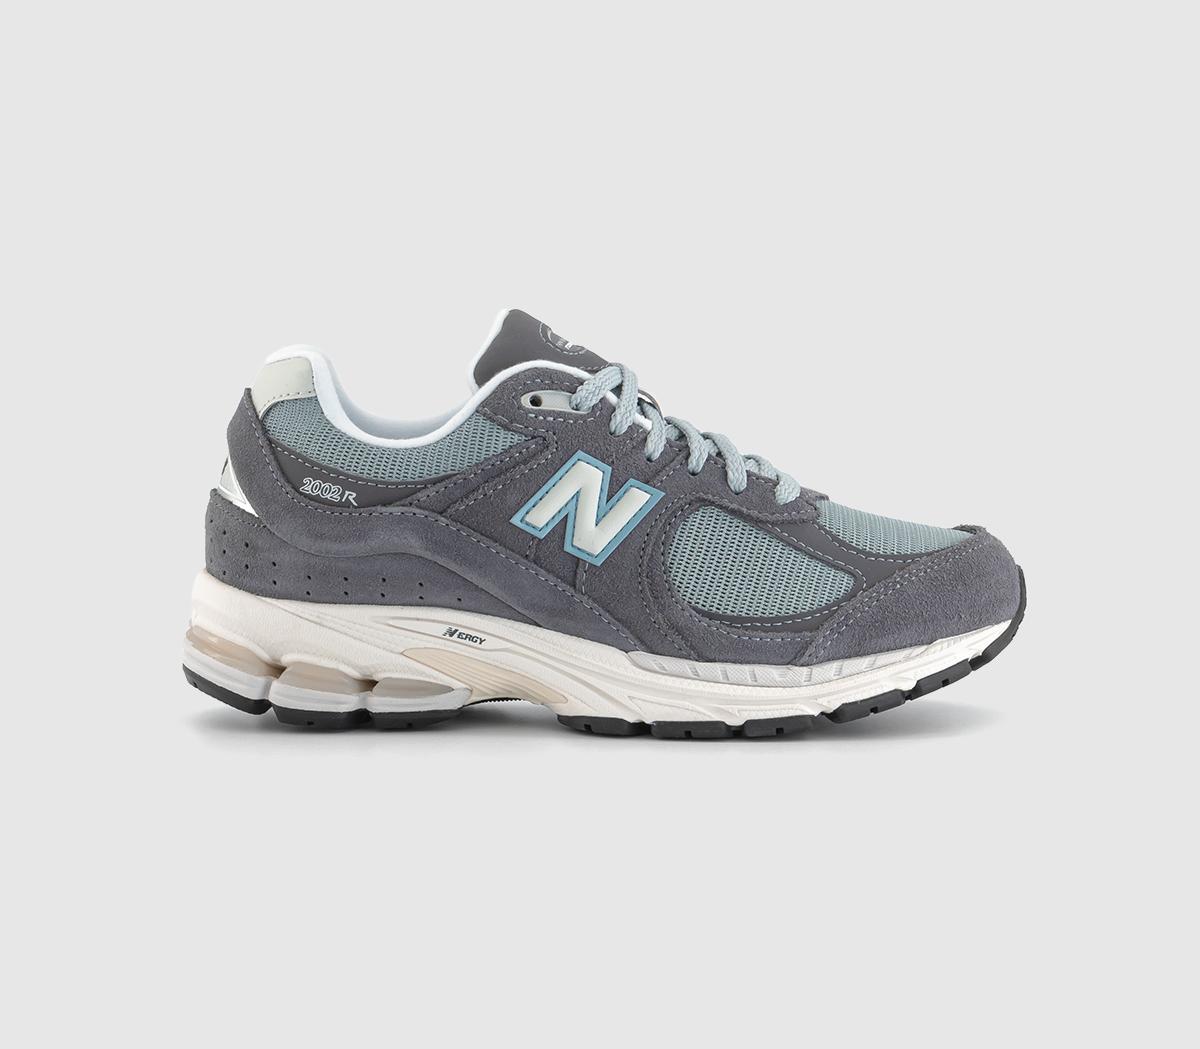 New Balance2002 TrainersMagnet Offwhite